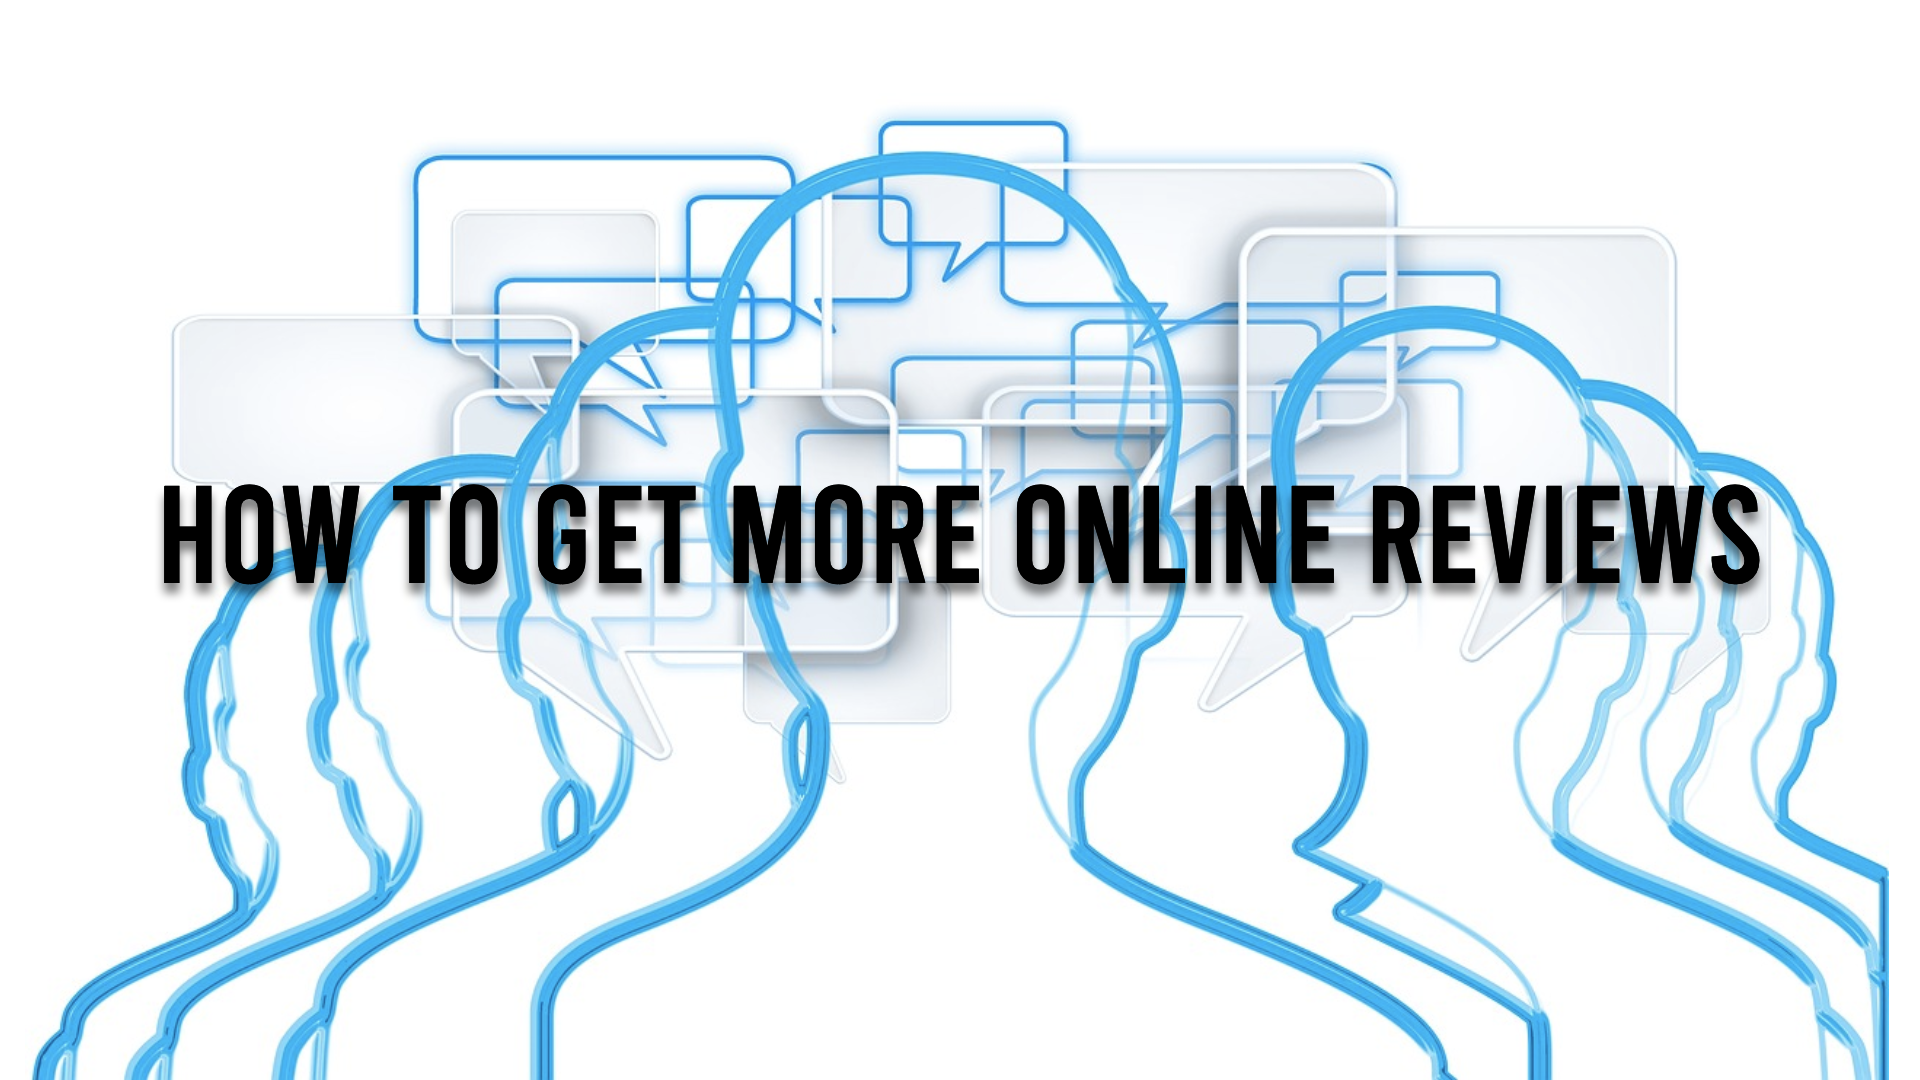 How to Get More Online Reviews